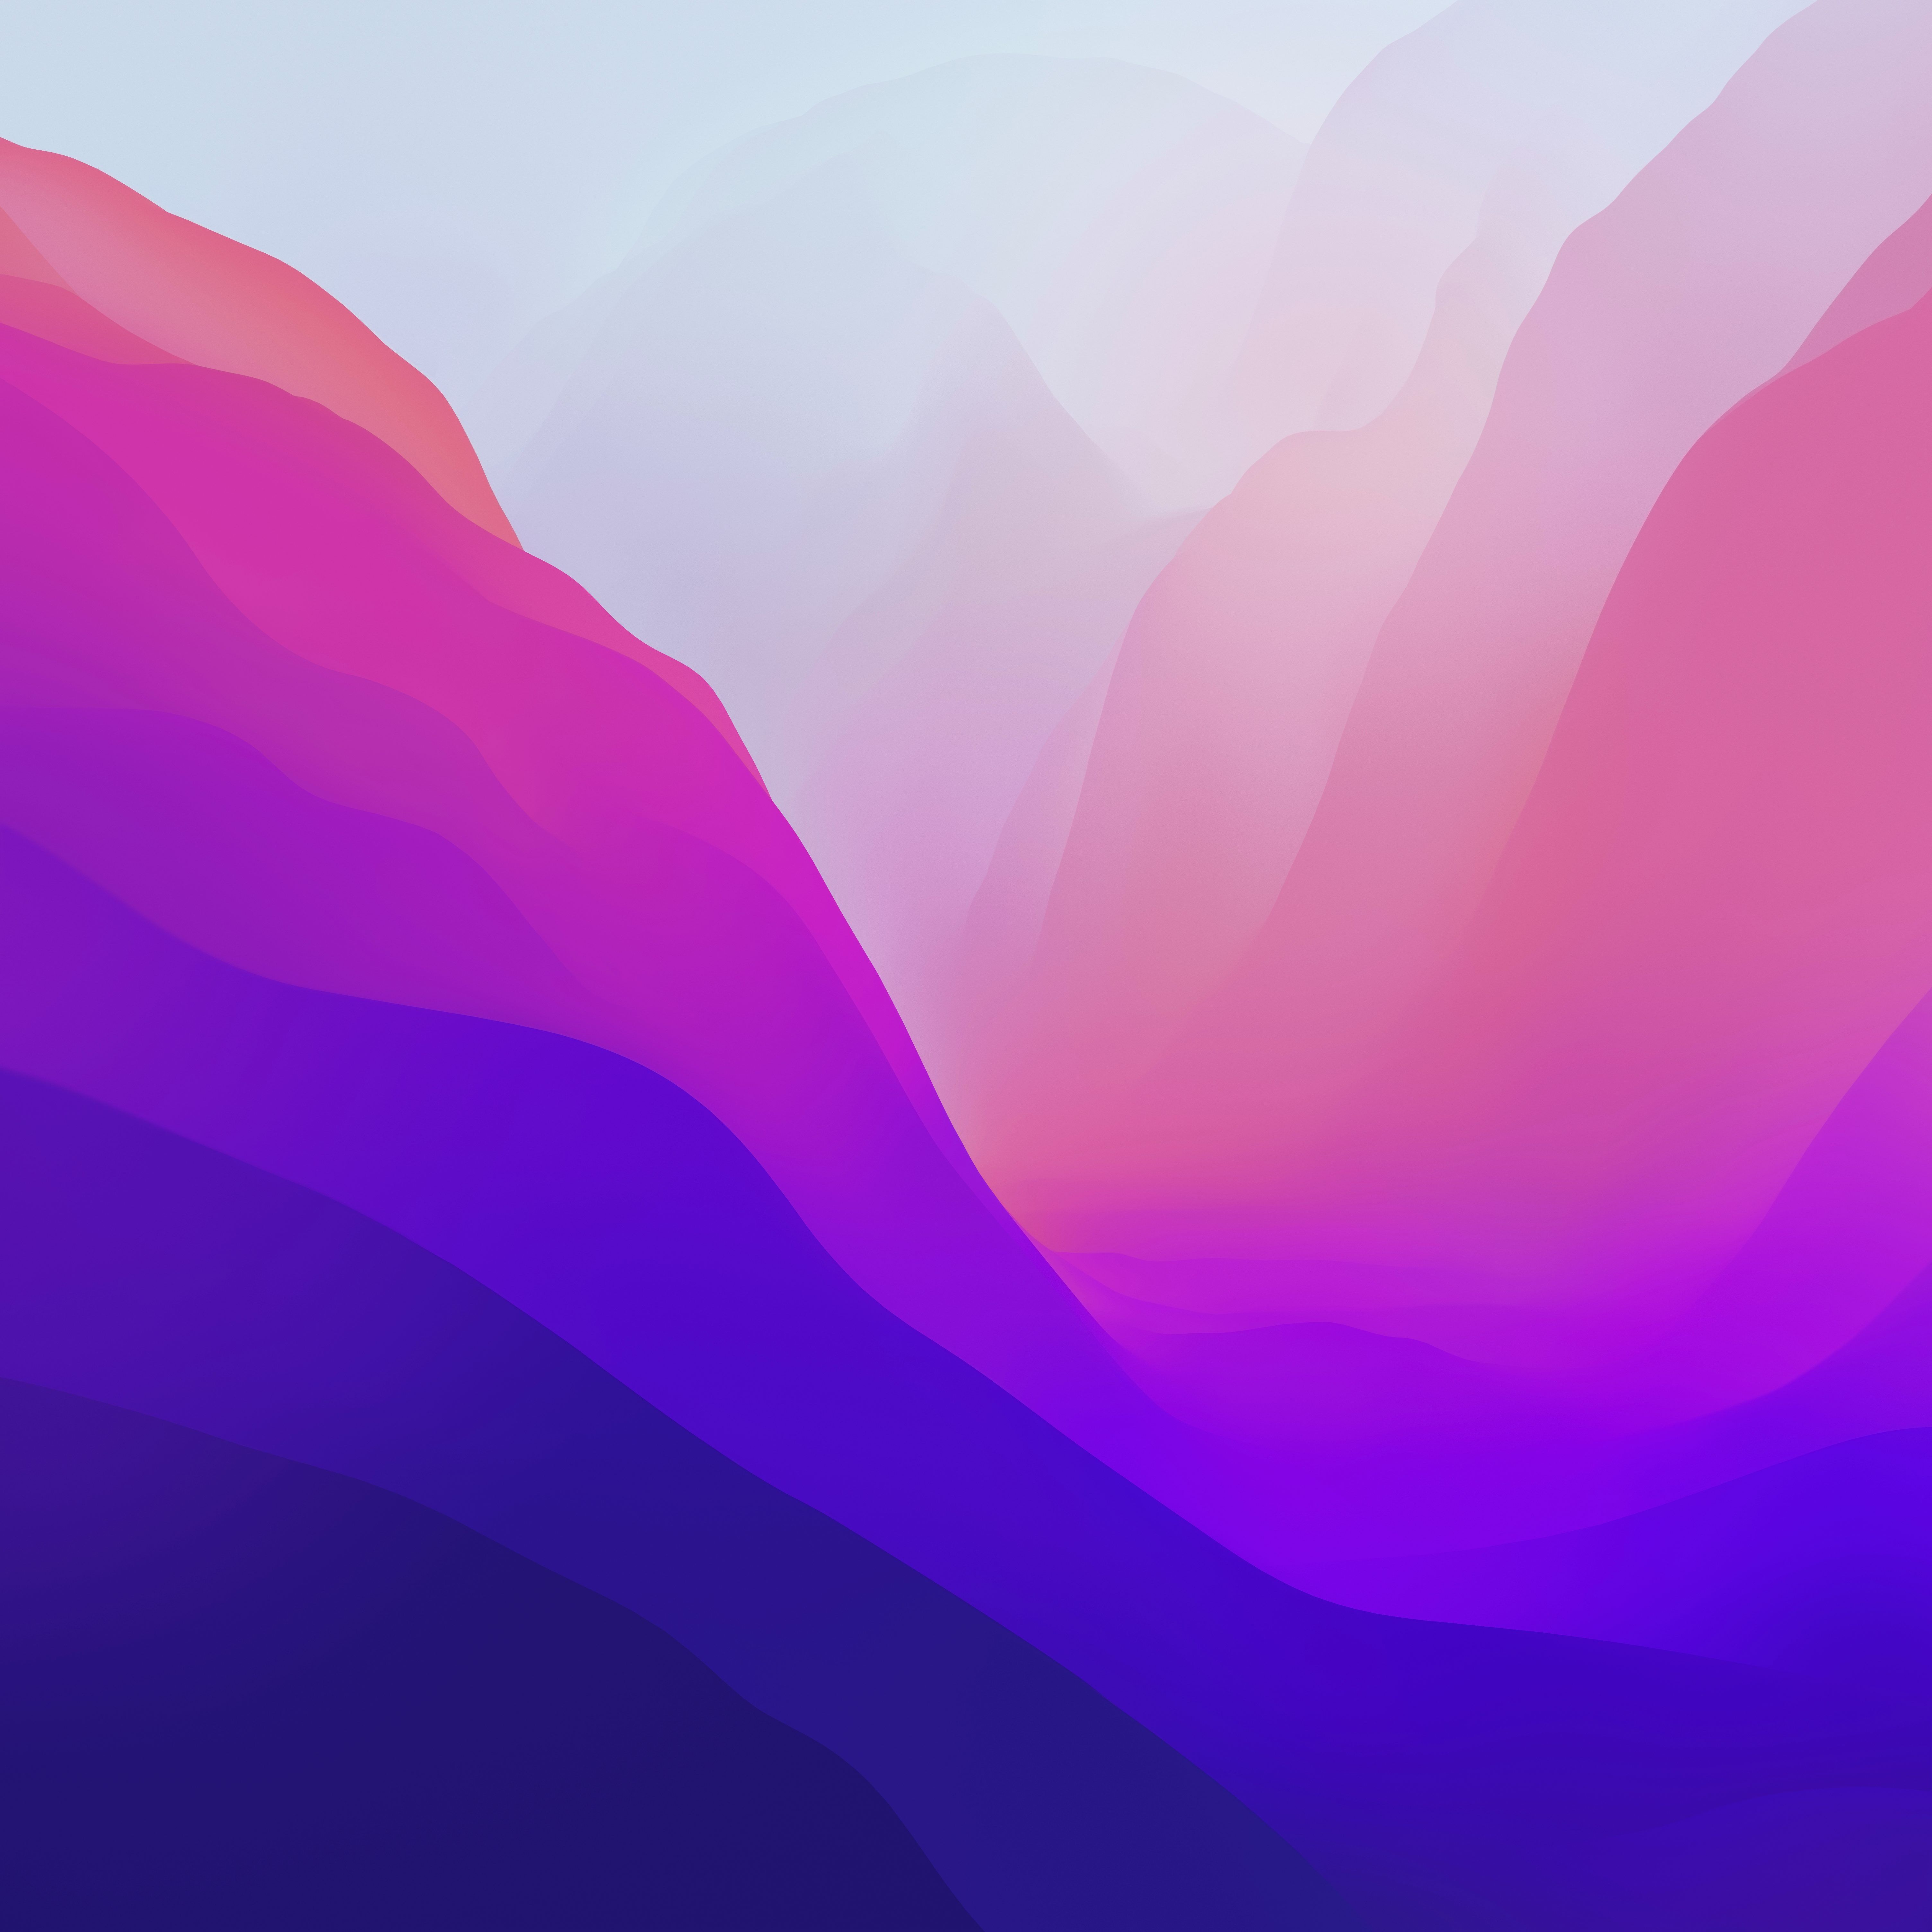 Ios 8 Wallpaper designs, themes, templates and downloadable graphic  elements on Dribbble